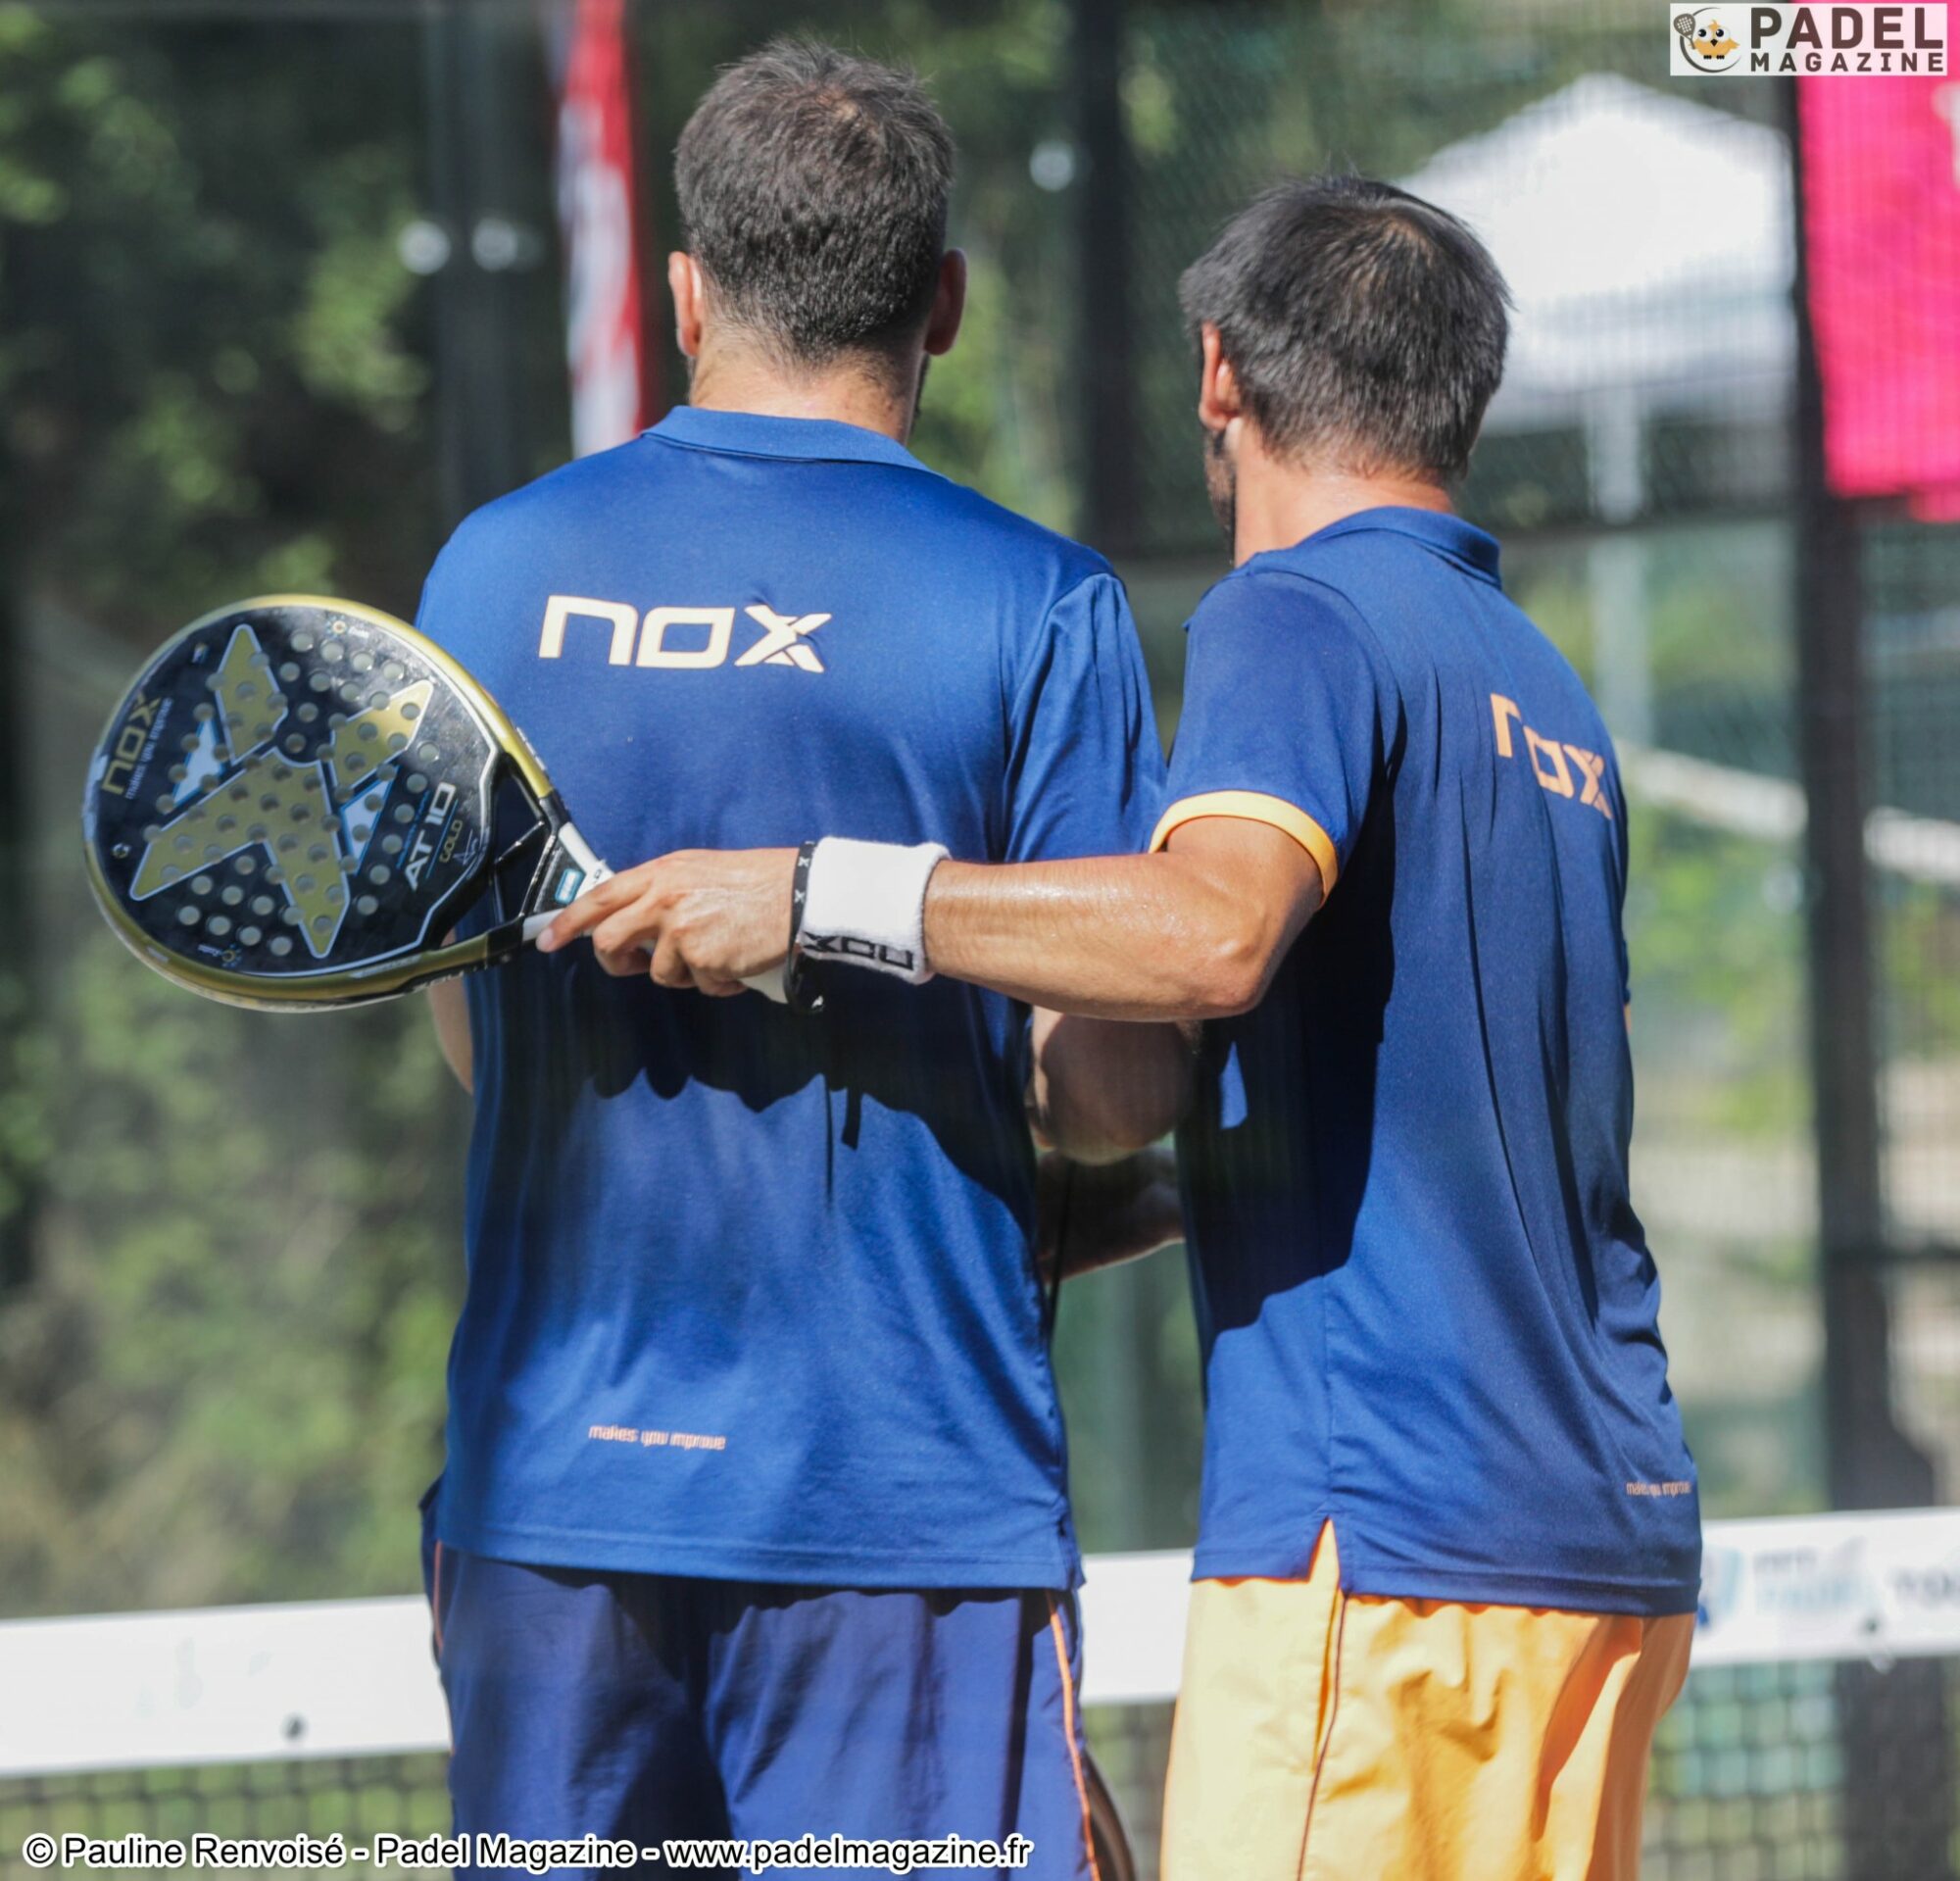 Maigret / Tison: A first on the FFT PADEL TOUR